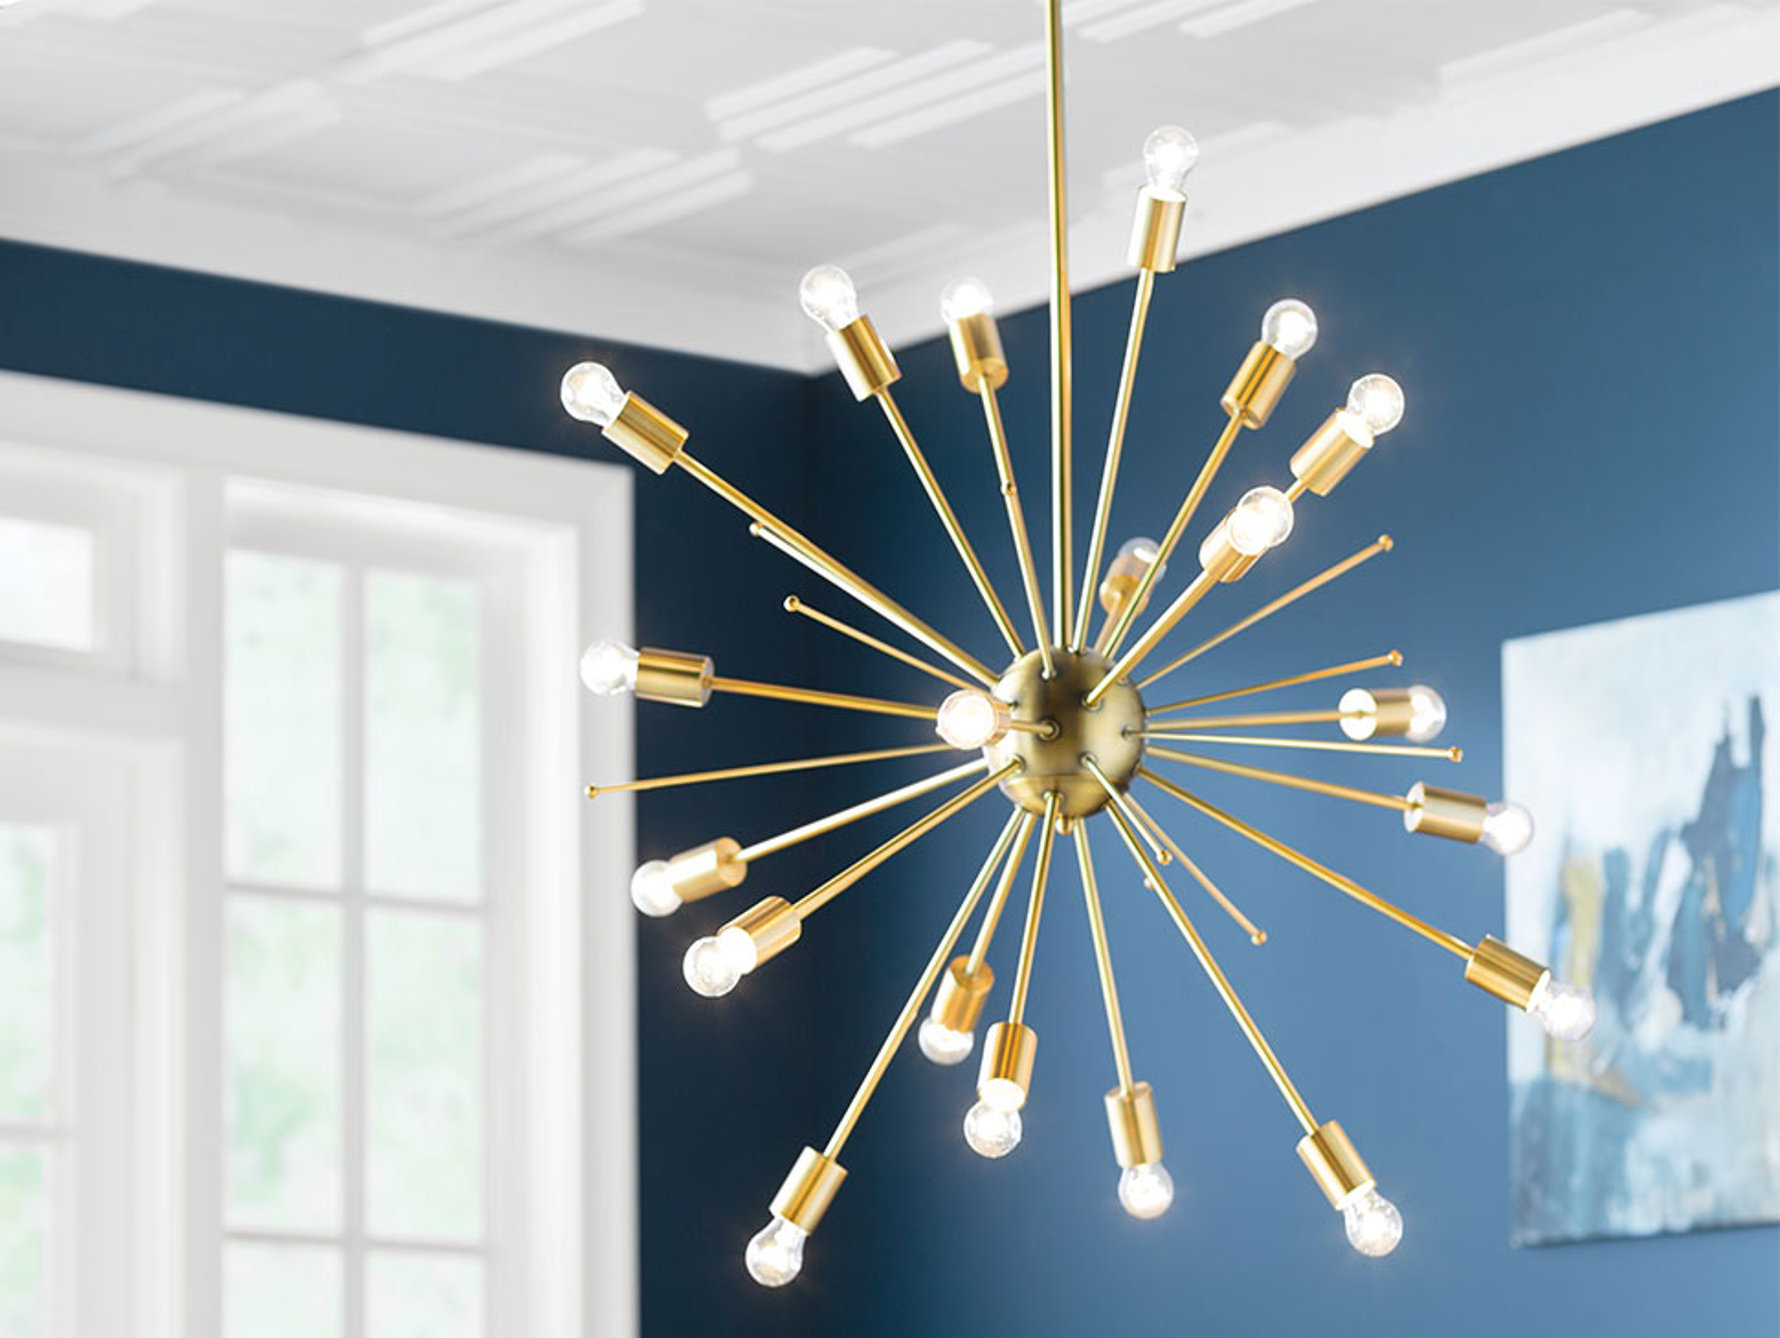 How to Install a Ceiling Light